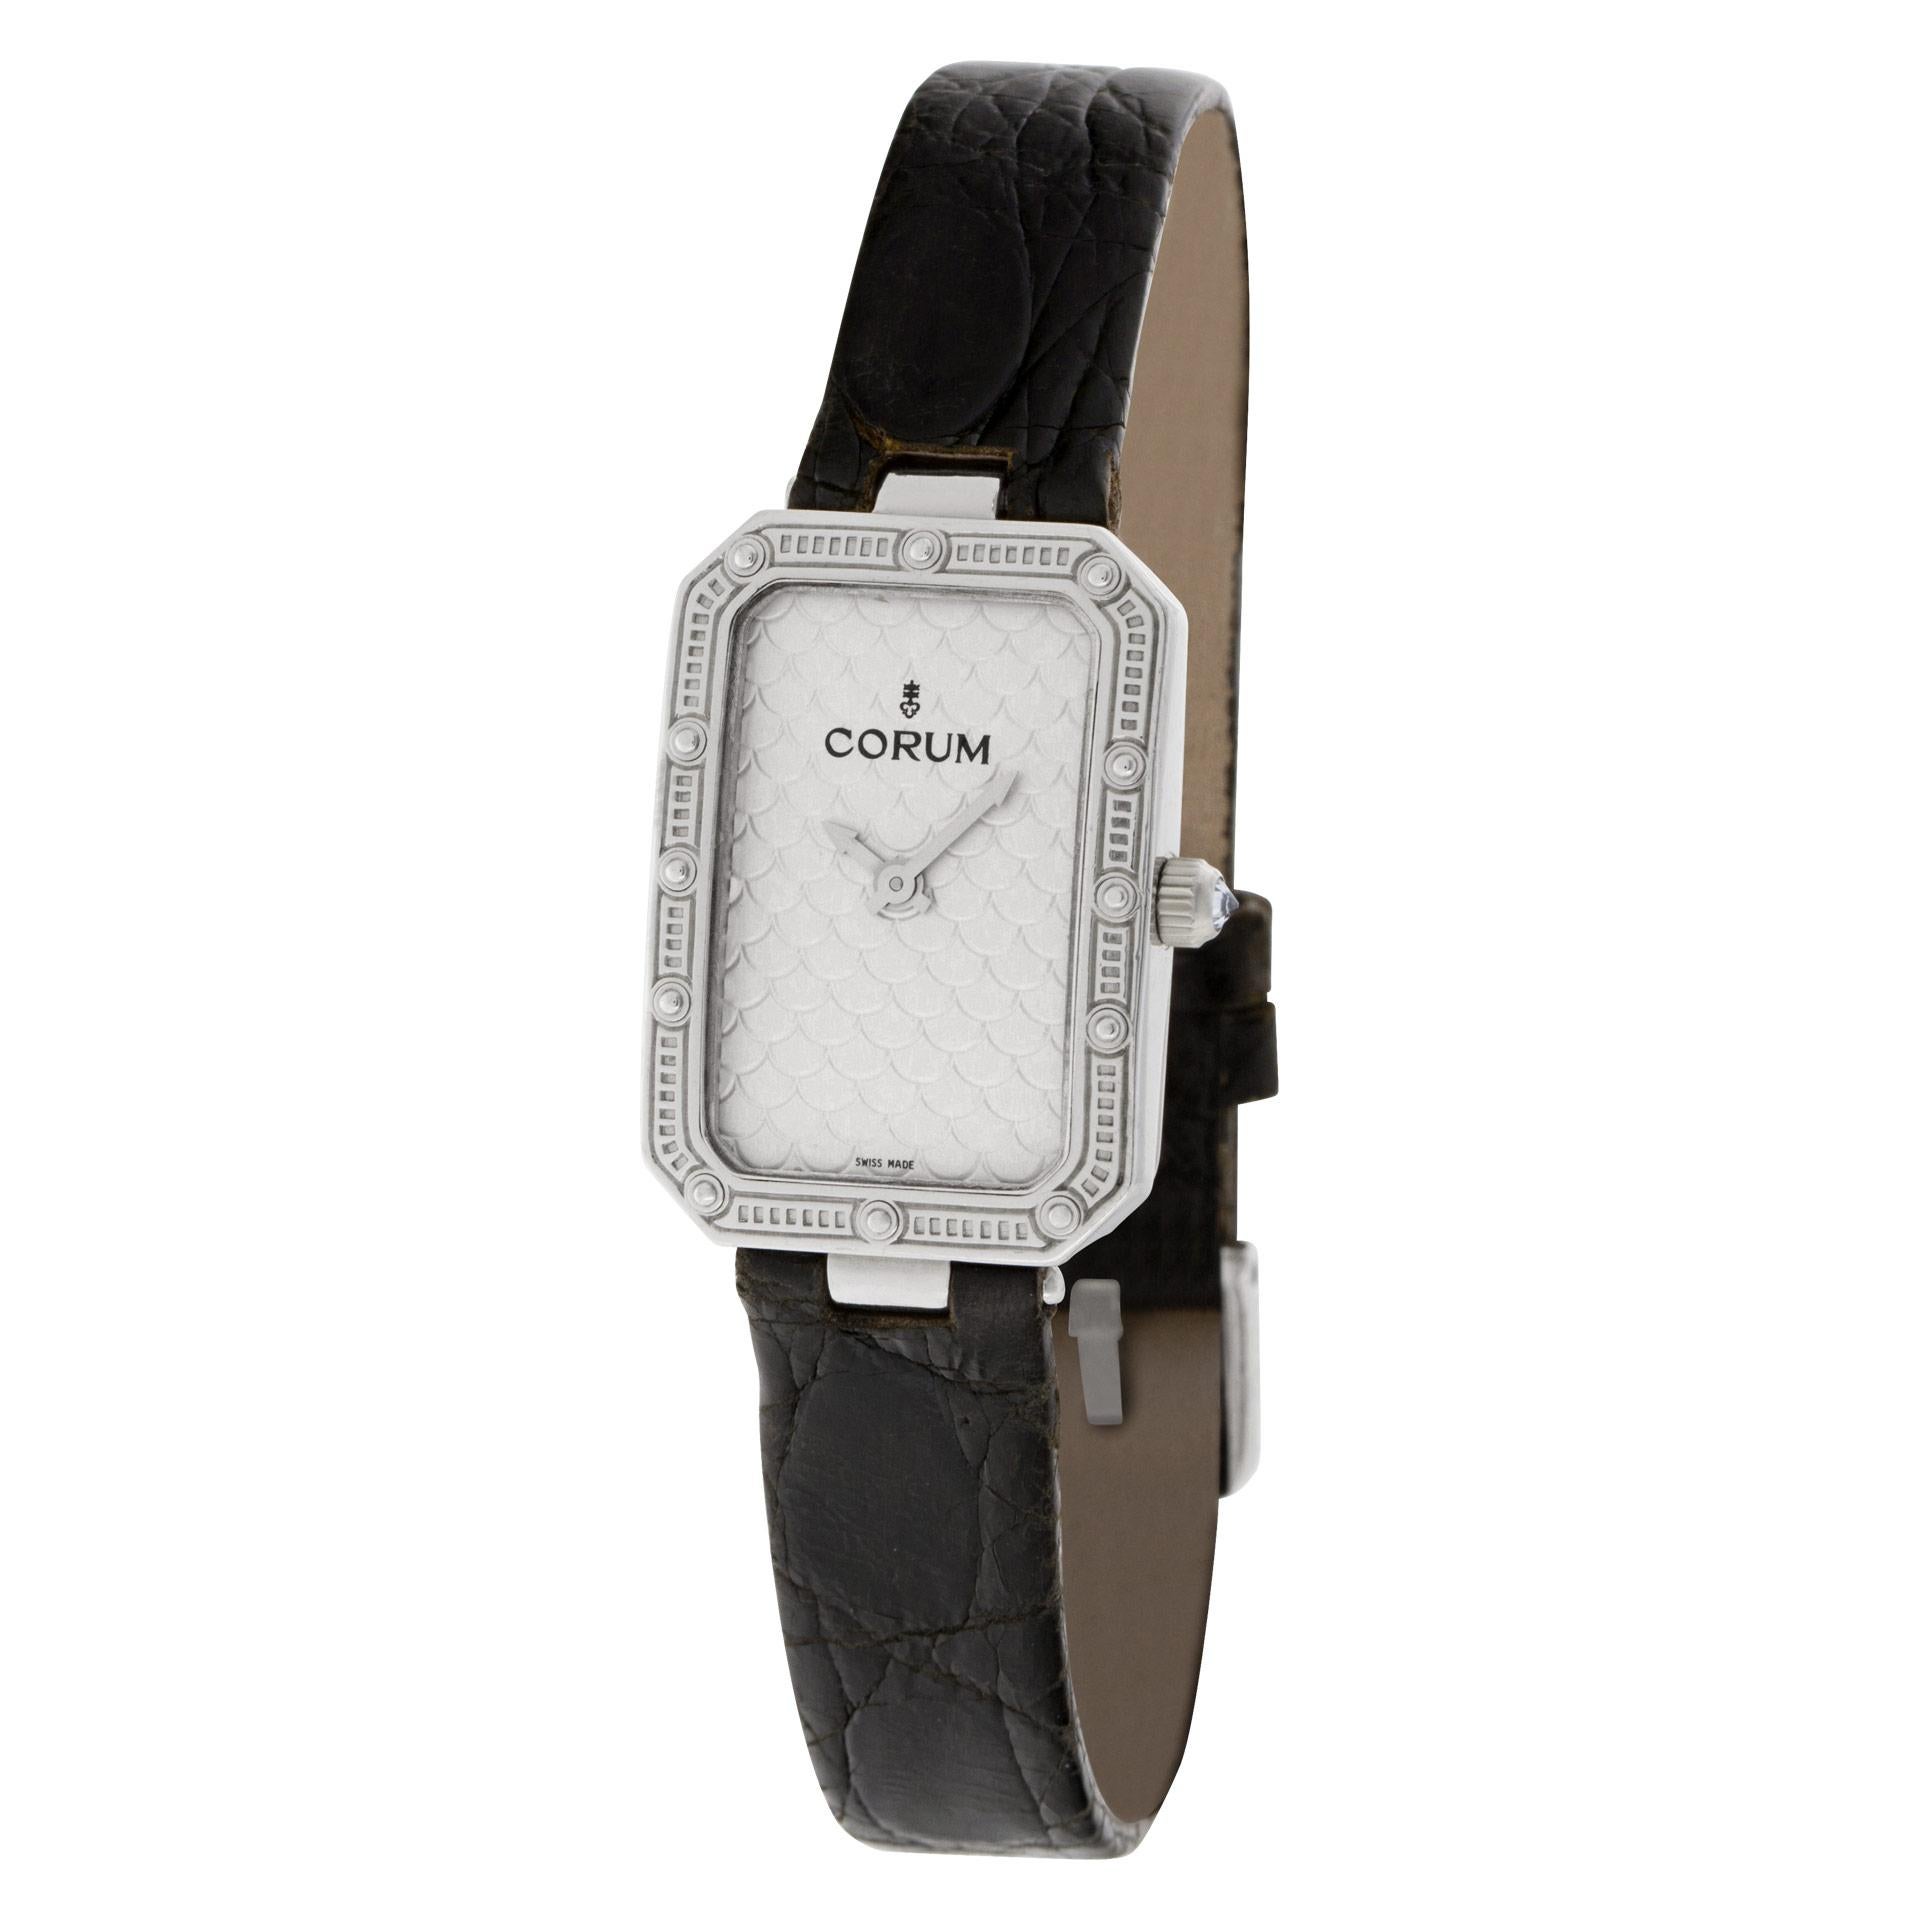 Ladies Corum in 18k white gold on a leather strap. Quartz. Case size 20mm x 28mm. With box and papers. Ref 24 706 59. Fine Pre-owned Corum Watch.   Certified preowned Corum 24 706 59 watch is made out of white gold on a Black Leather strap with a